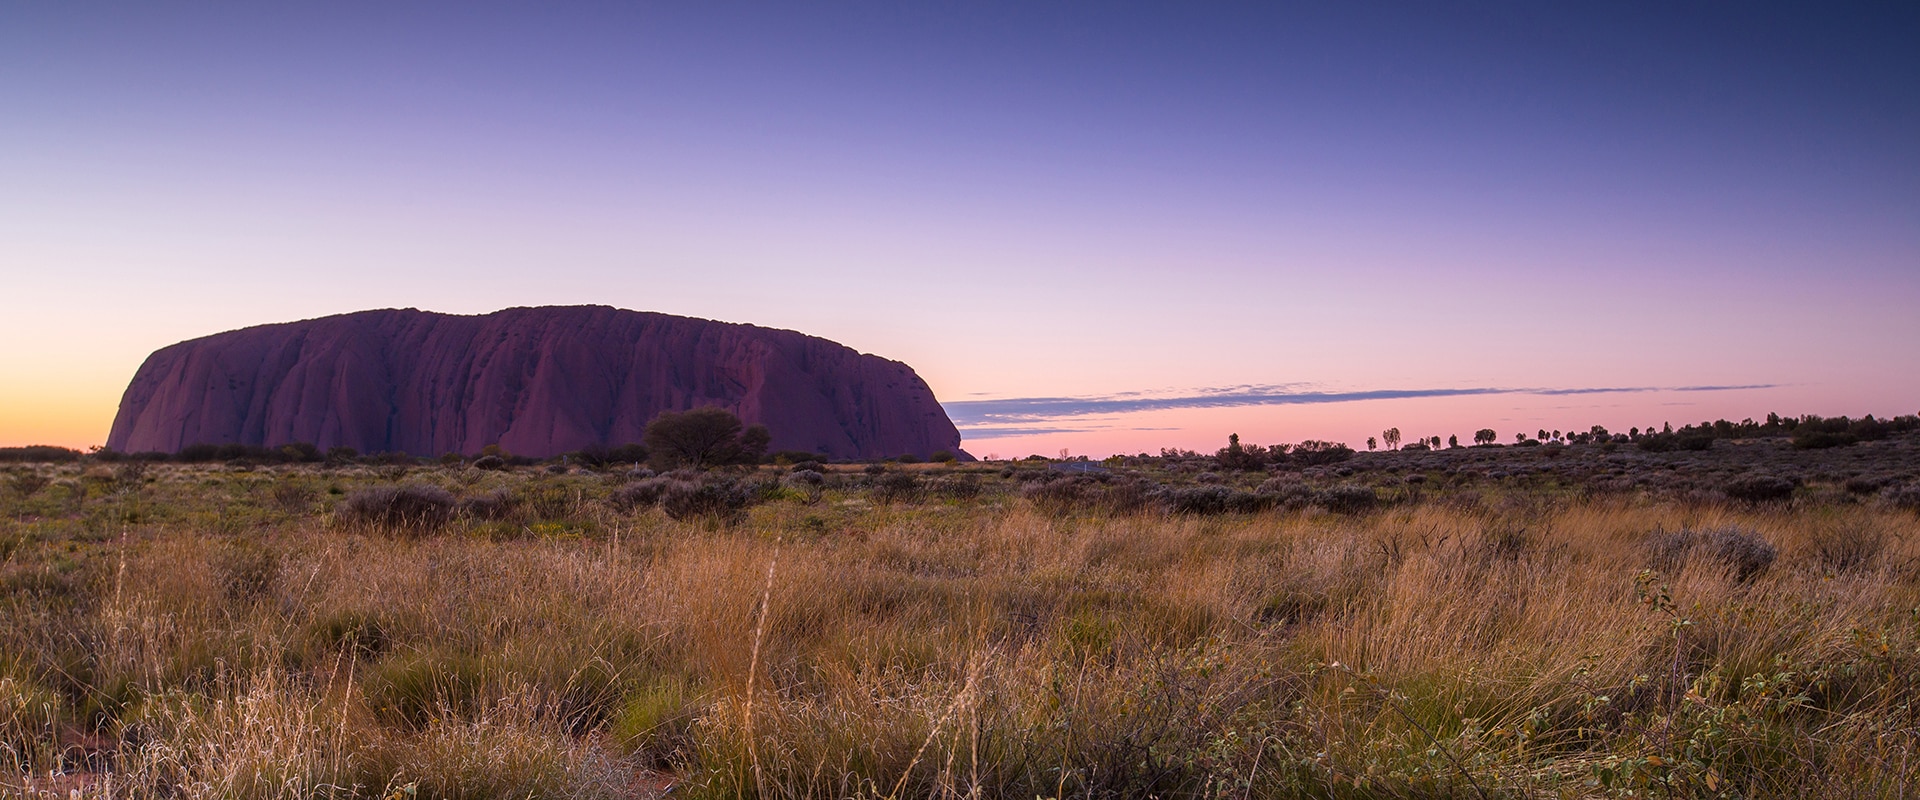 Ayers Rock at Sunset with a purple sky, Northern Territory